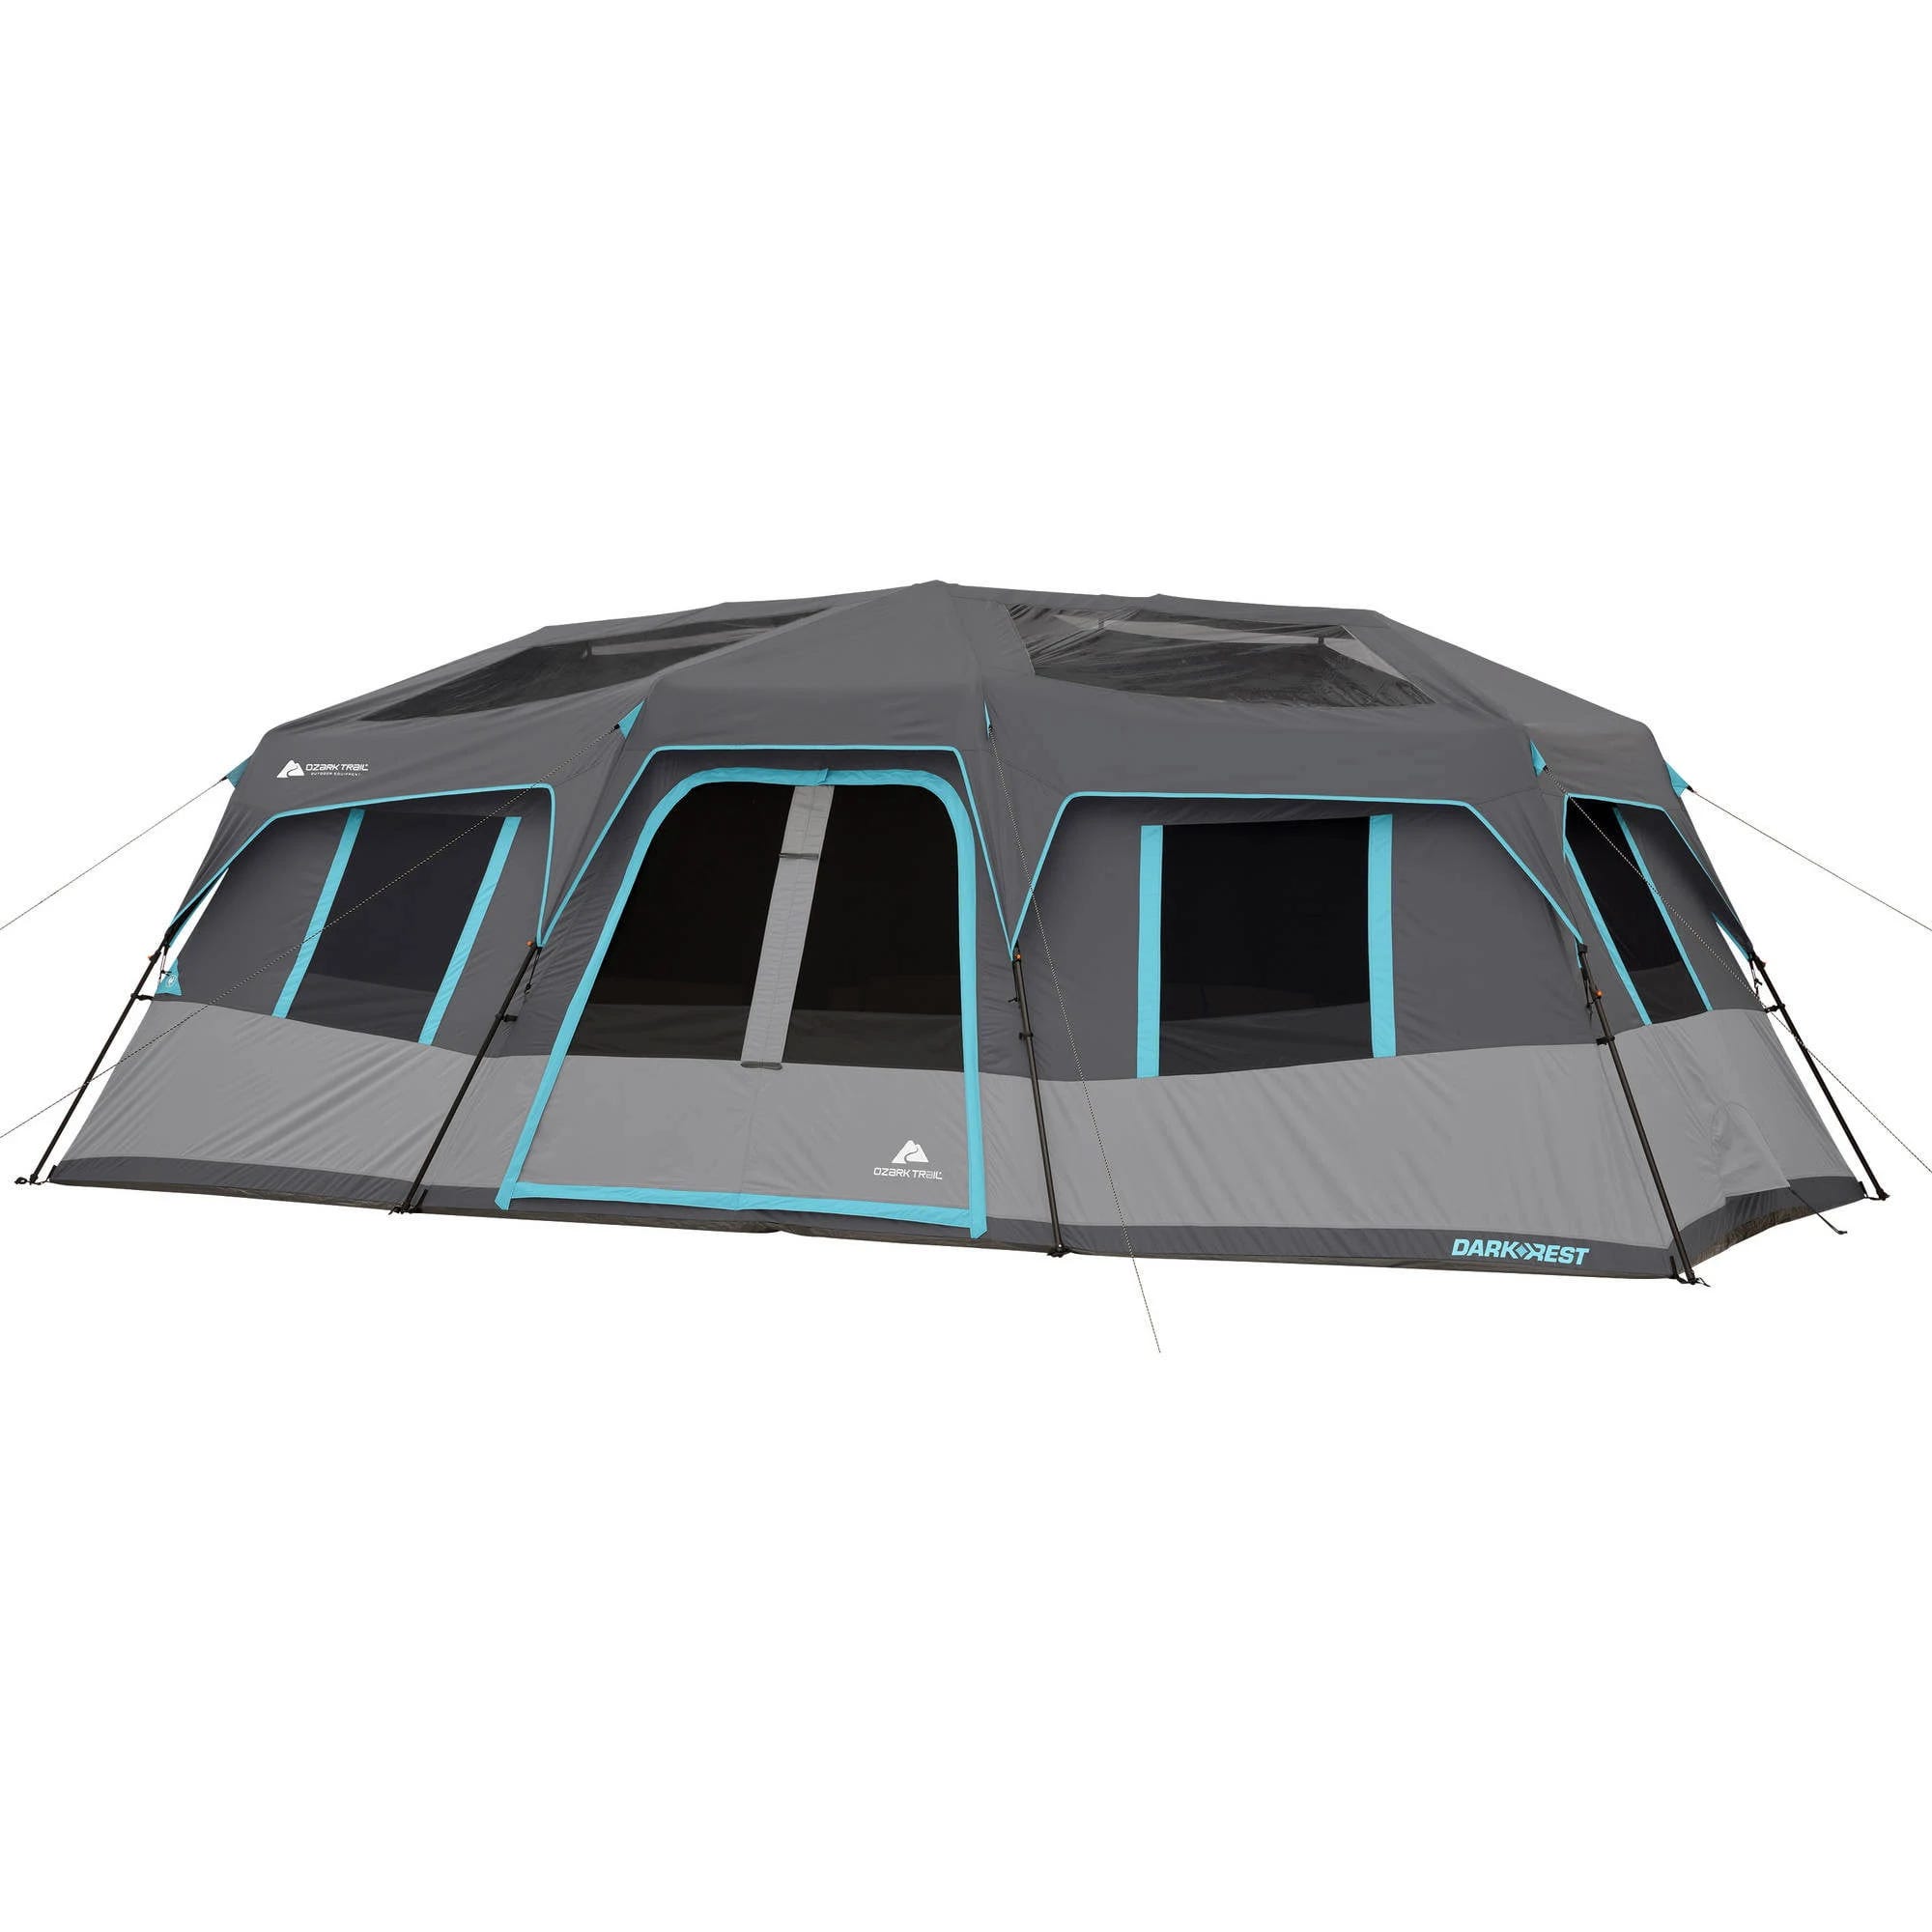 12-Person Instant Cabin Tent with Dark Rest Technology | Image